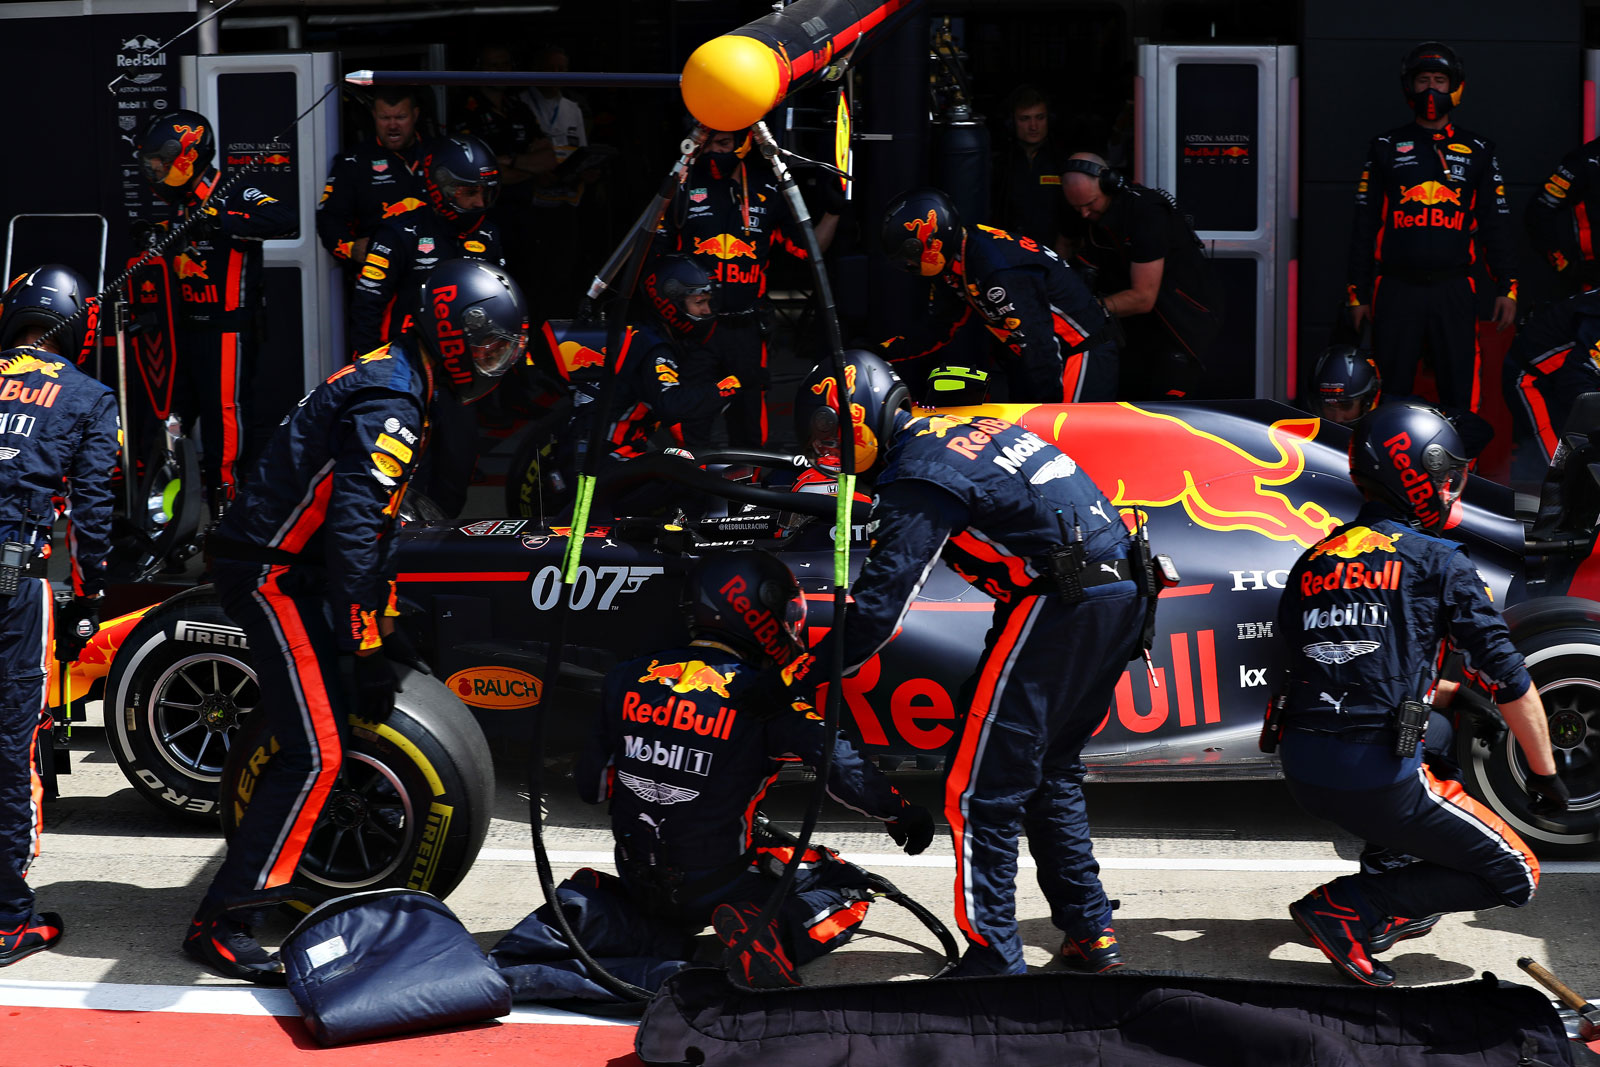 Multiple Red Bull mechanics work to perform a pit stop during a race